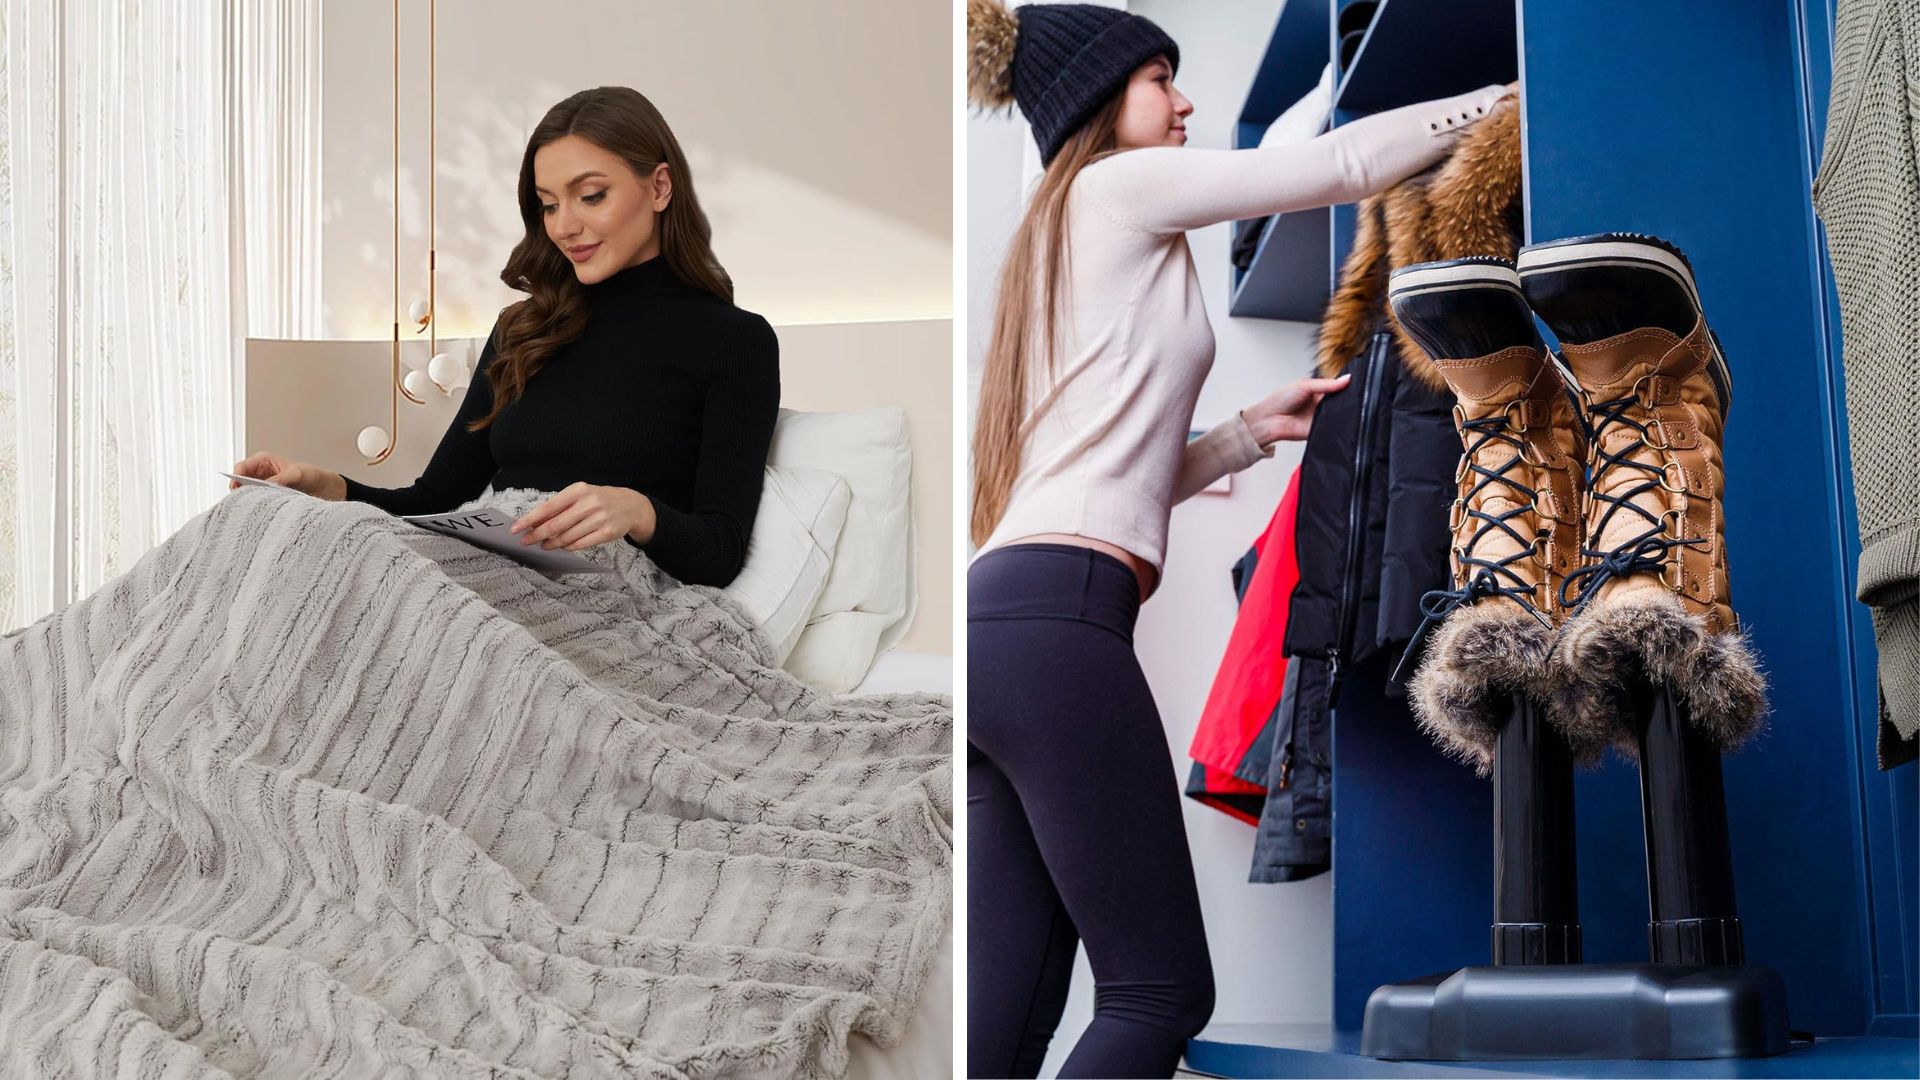 11 Products That'll Make Winter More Bearable